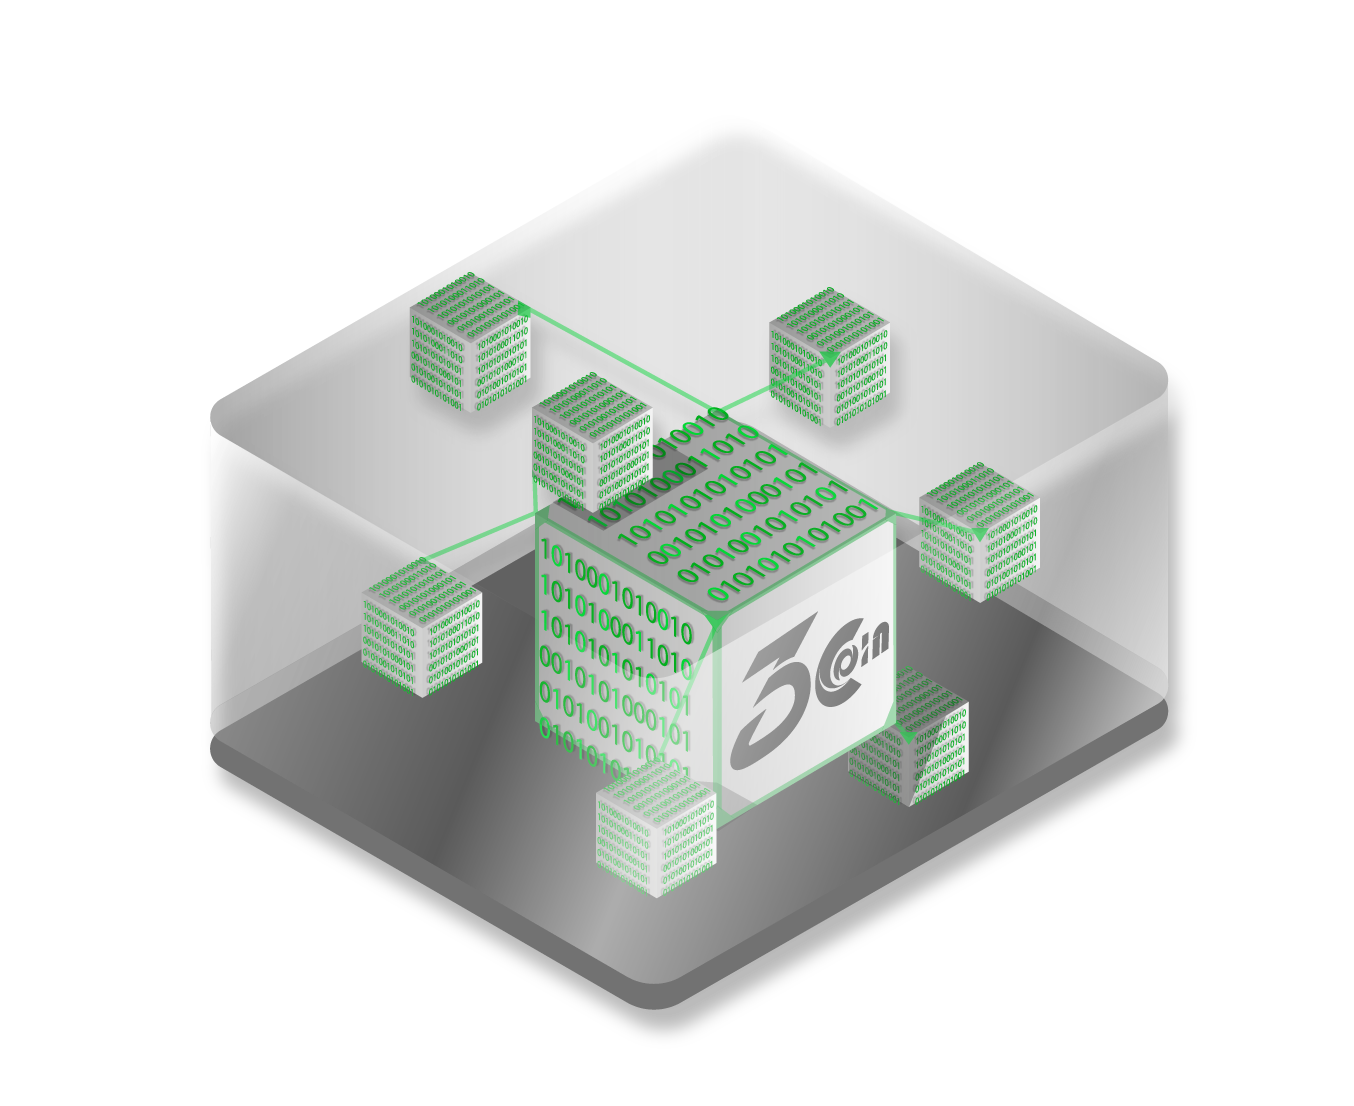 3DCoin network is divided into 3 layers